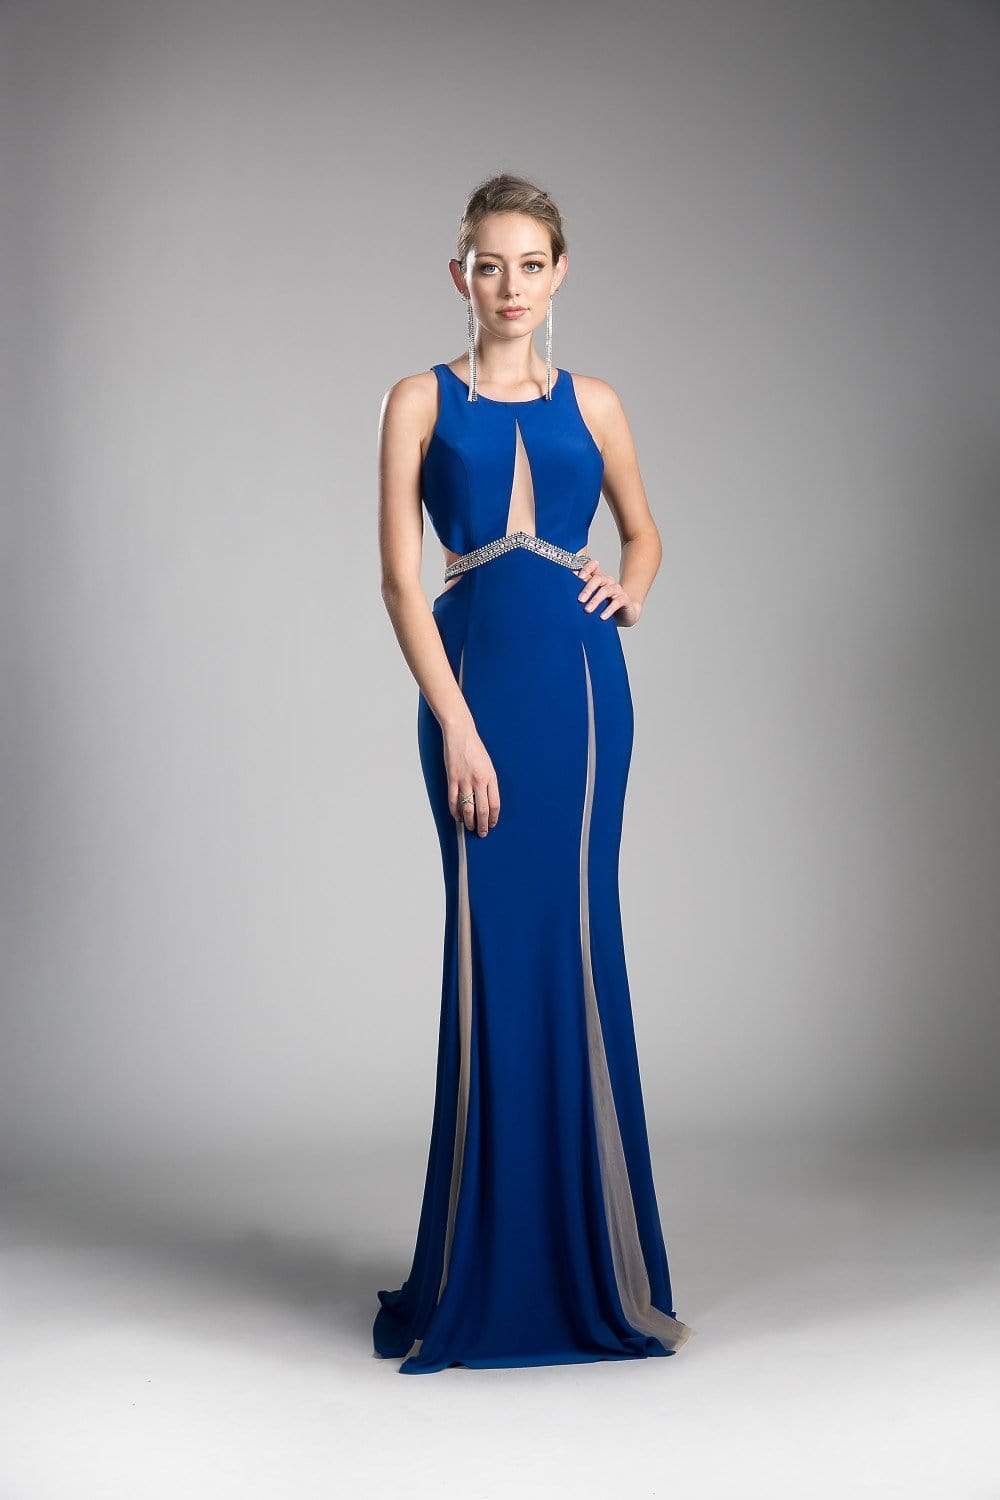 Cinderella Divine - 62806 Peaked Illusion Paneled Cutout Long Gown Special Occasion Dress 2 / Royal